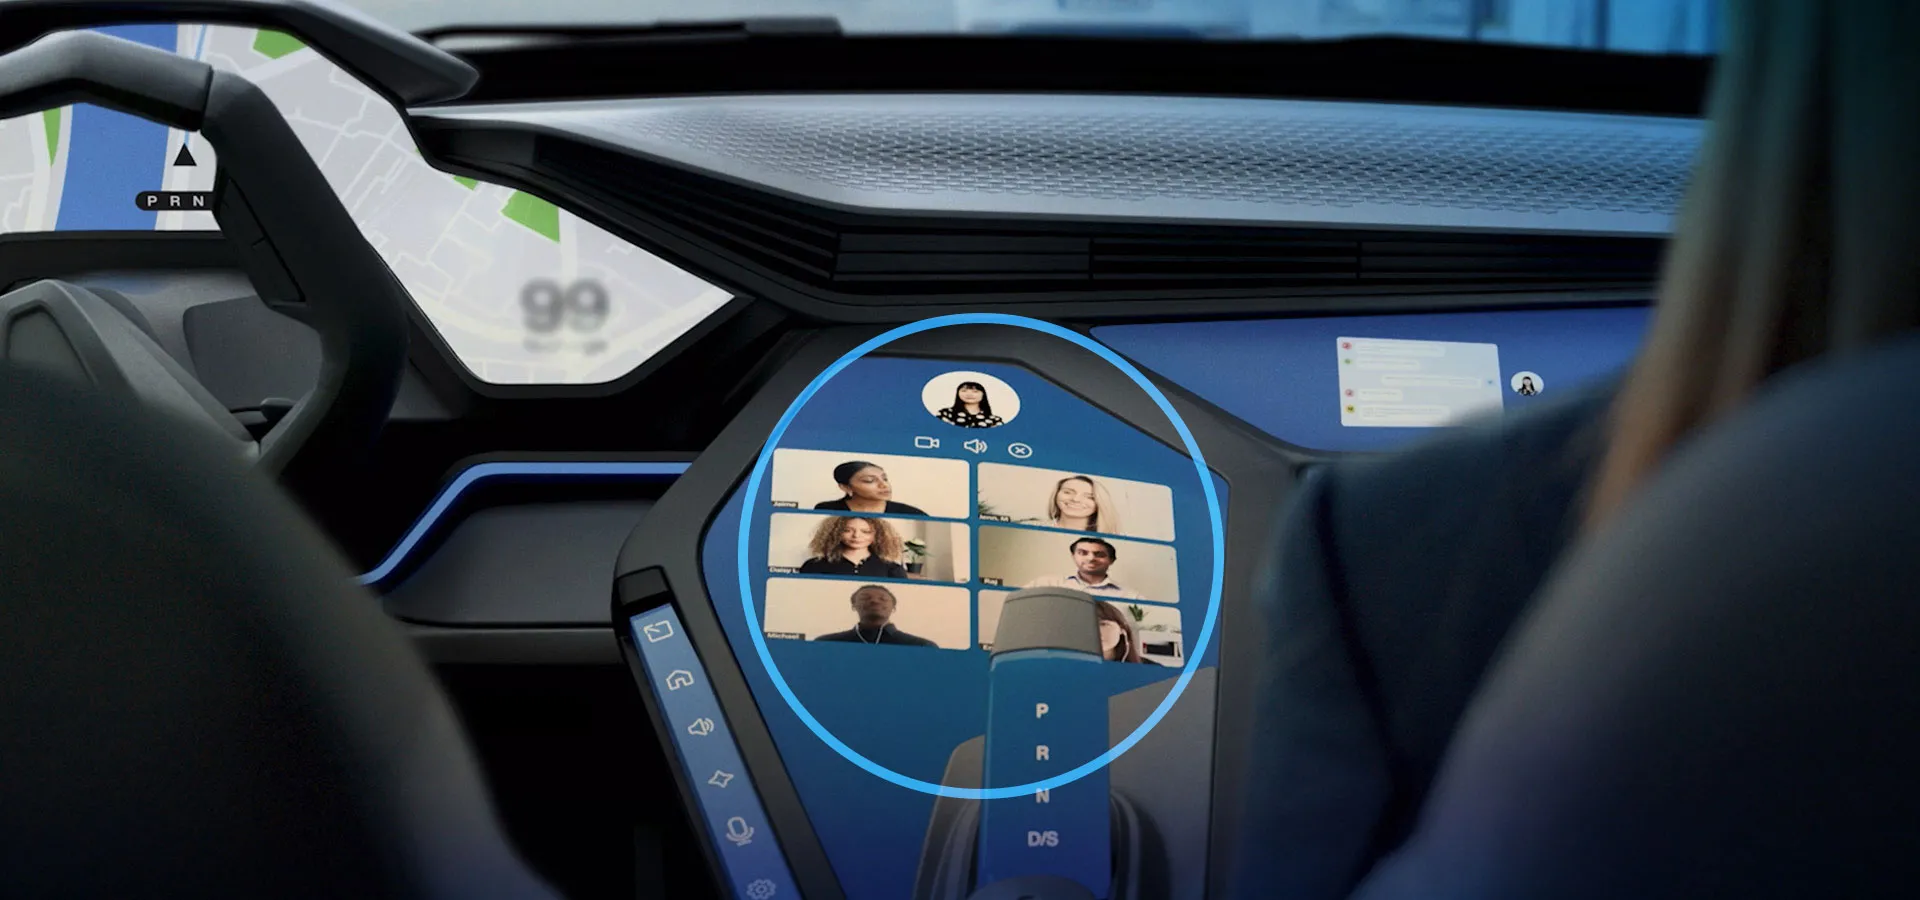 The Future of Connected Mobility > Transportation & Mobility > Dassault Systèmes